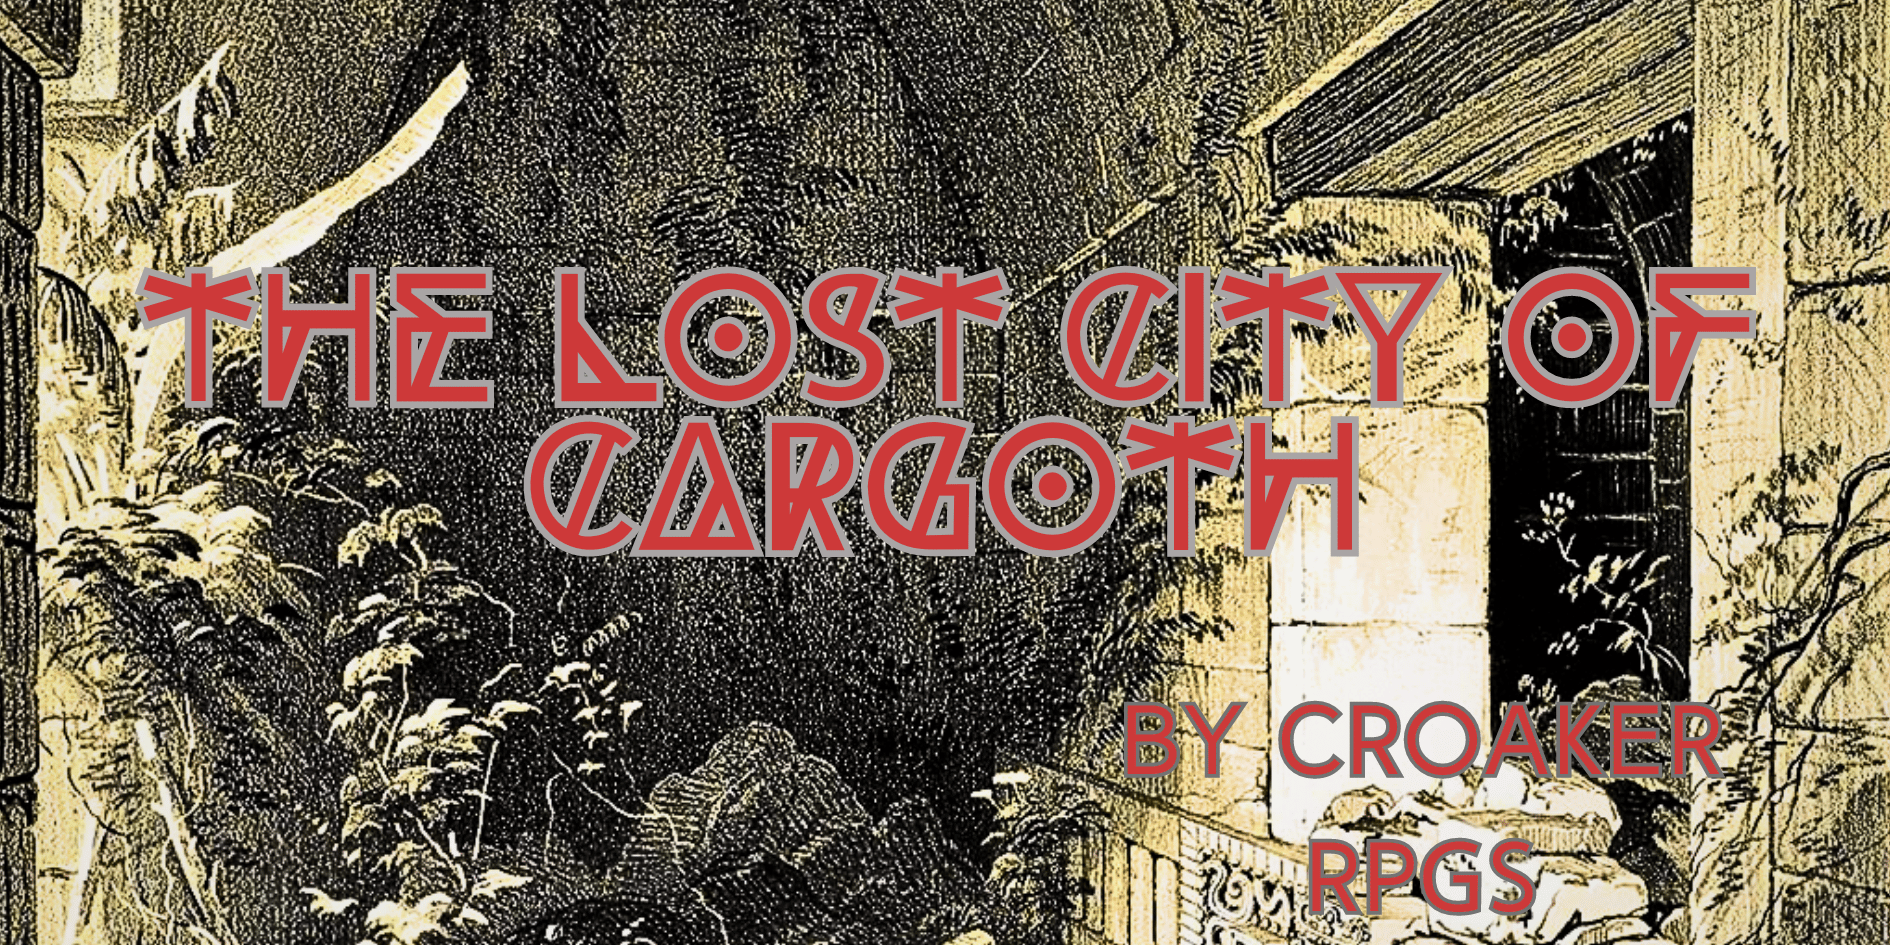 The Lost City of Cargoth